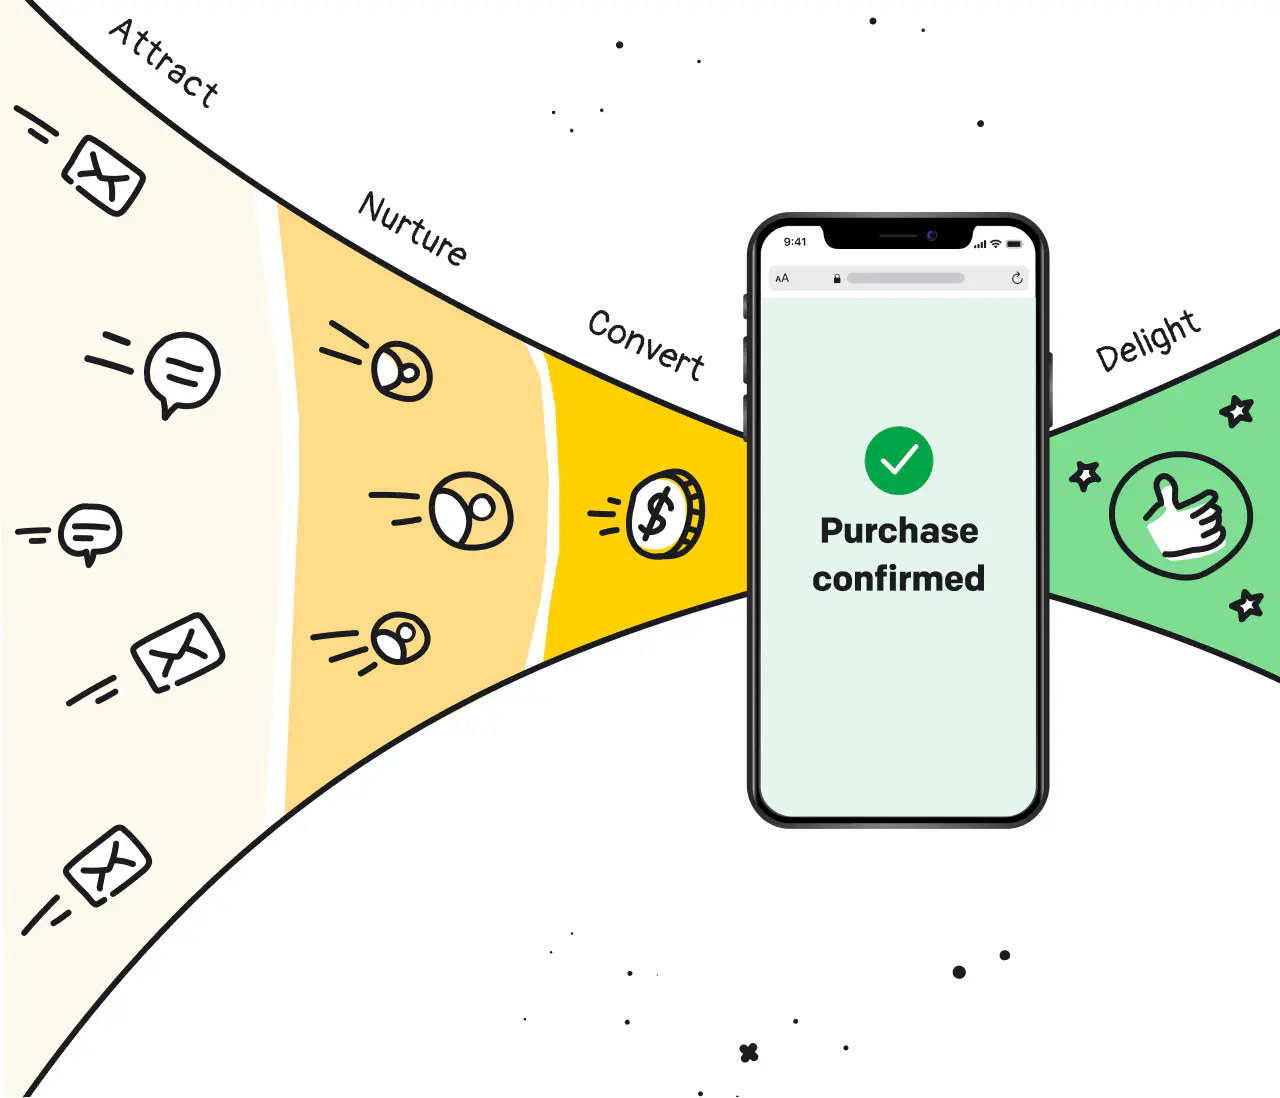 Lead generation funnel visualization for digital sale fazes: attracting prospects, nurturing potential customers, converting by online purchase on a mobile device and delighting